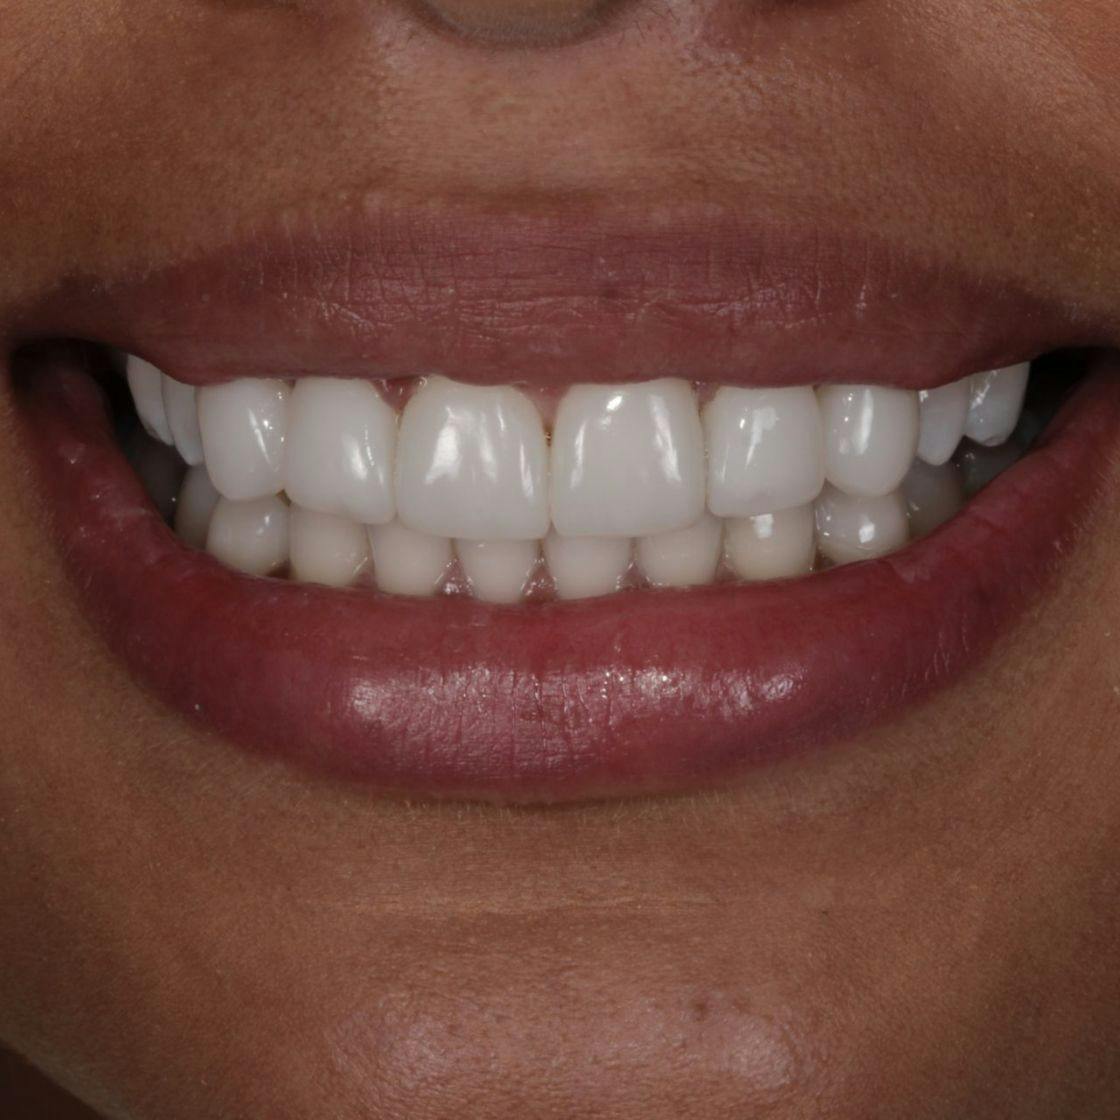 Woman's smile and teeth after composite bonding treatment